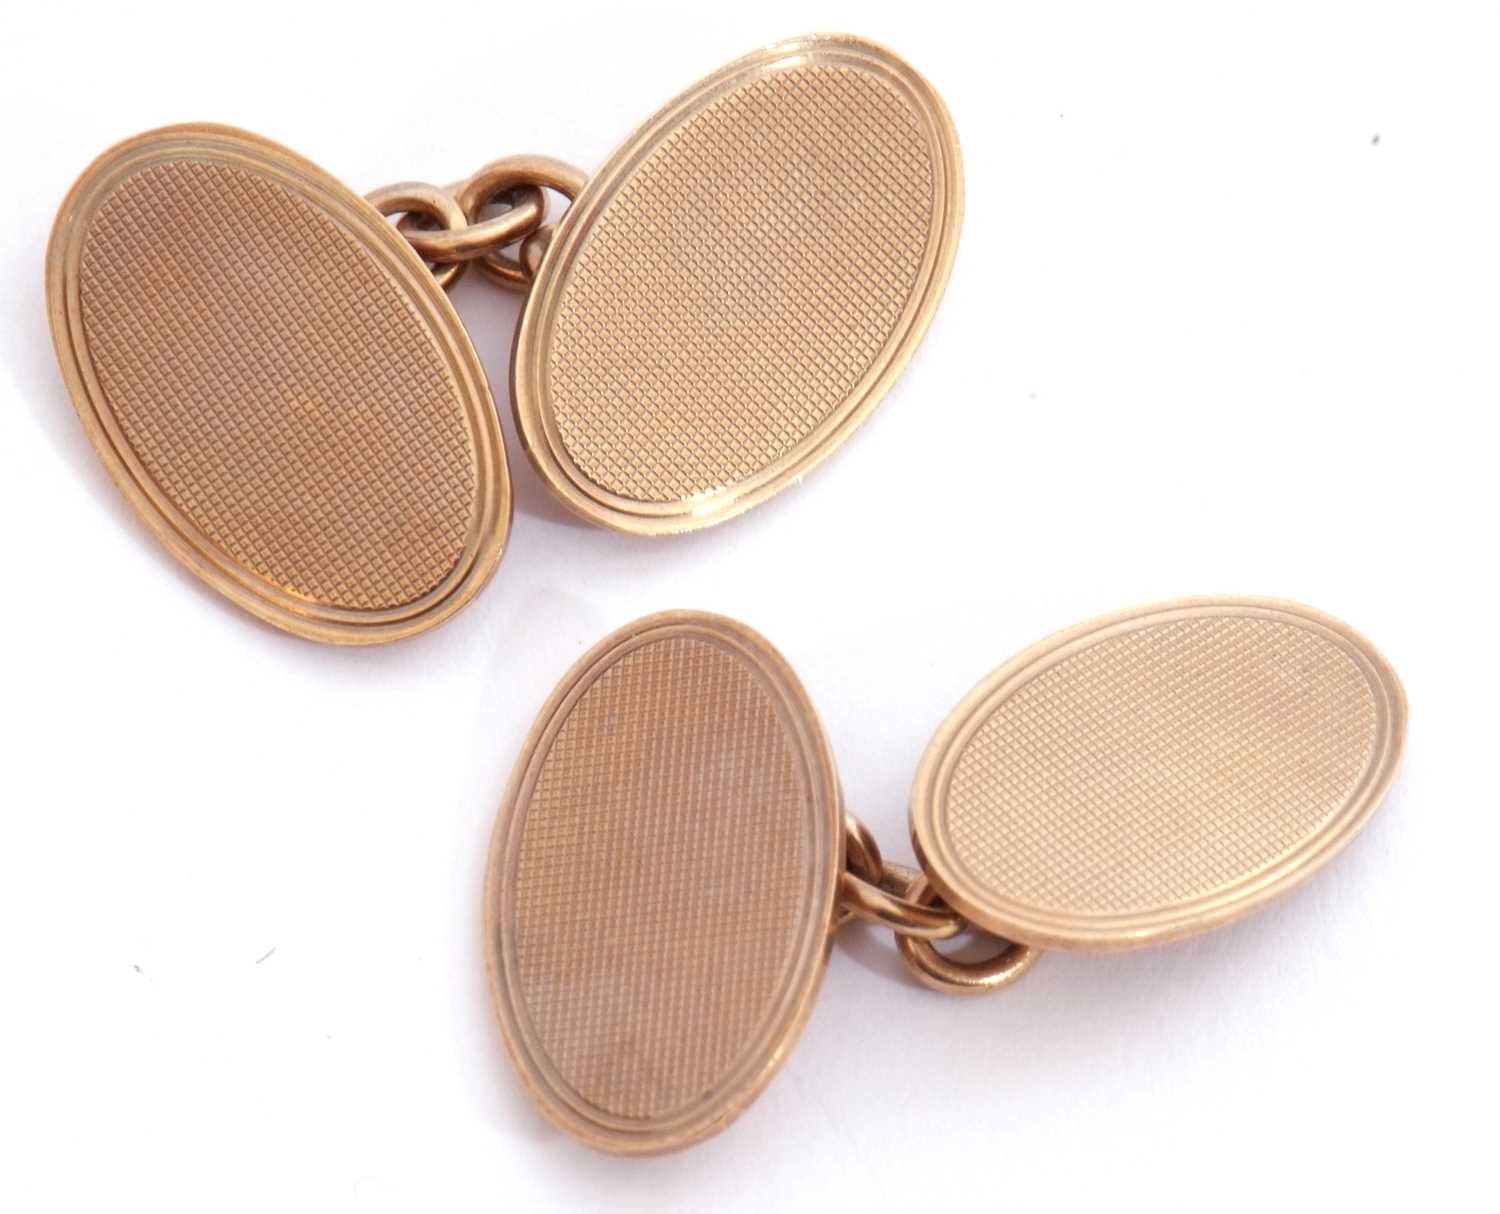 Pair of 9ct gold cuff links of oval shape, each panel with engine turned decoration, chain